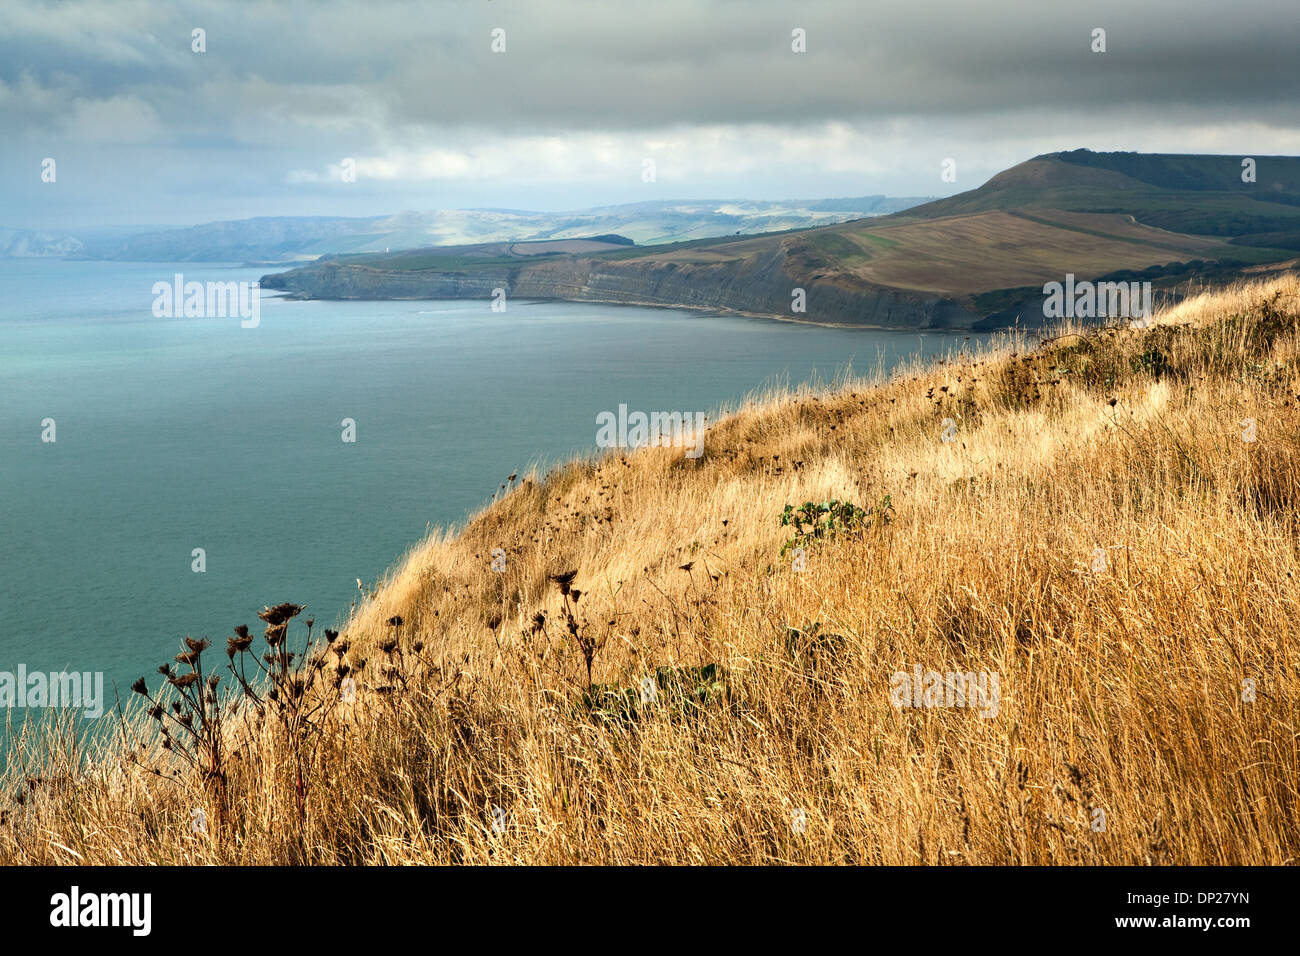 A view from St Aldhelm's Head in Purbeck looking along the Jurassic Coast in Dorset UK towards Kimmeridge Bay. Stock Photo